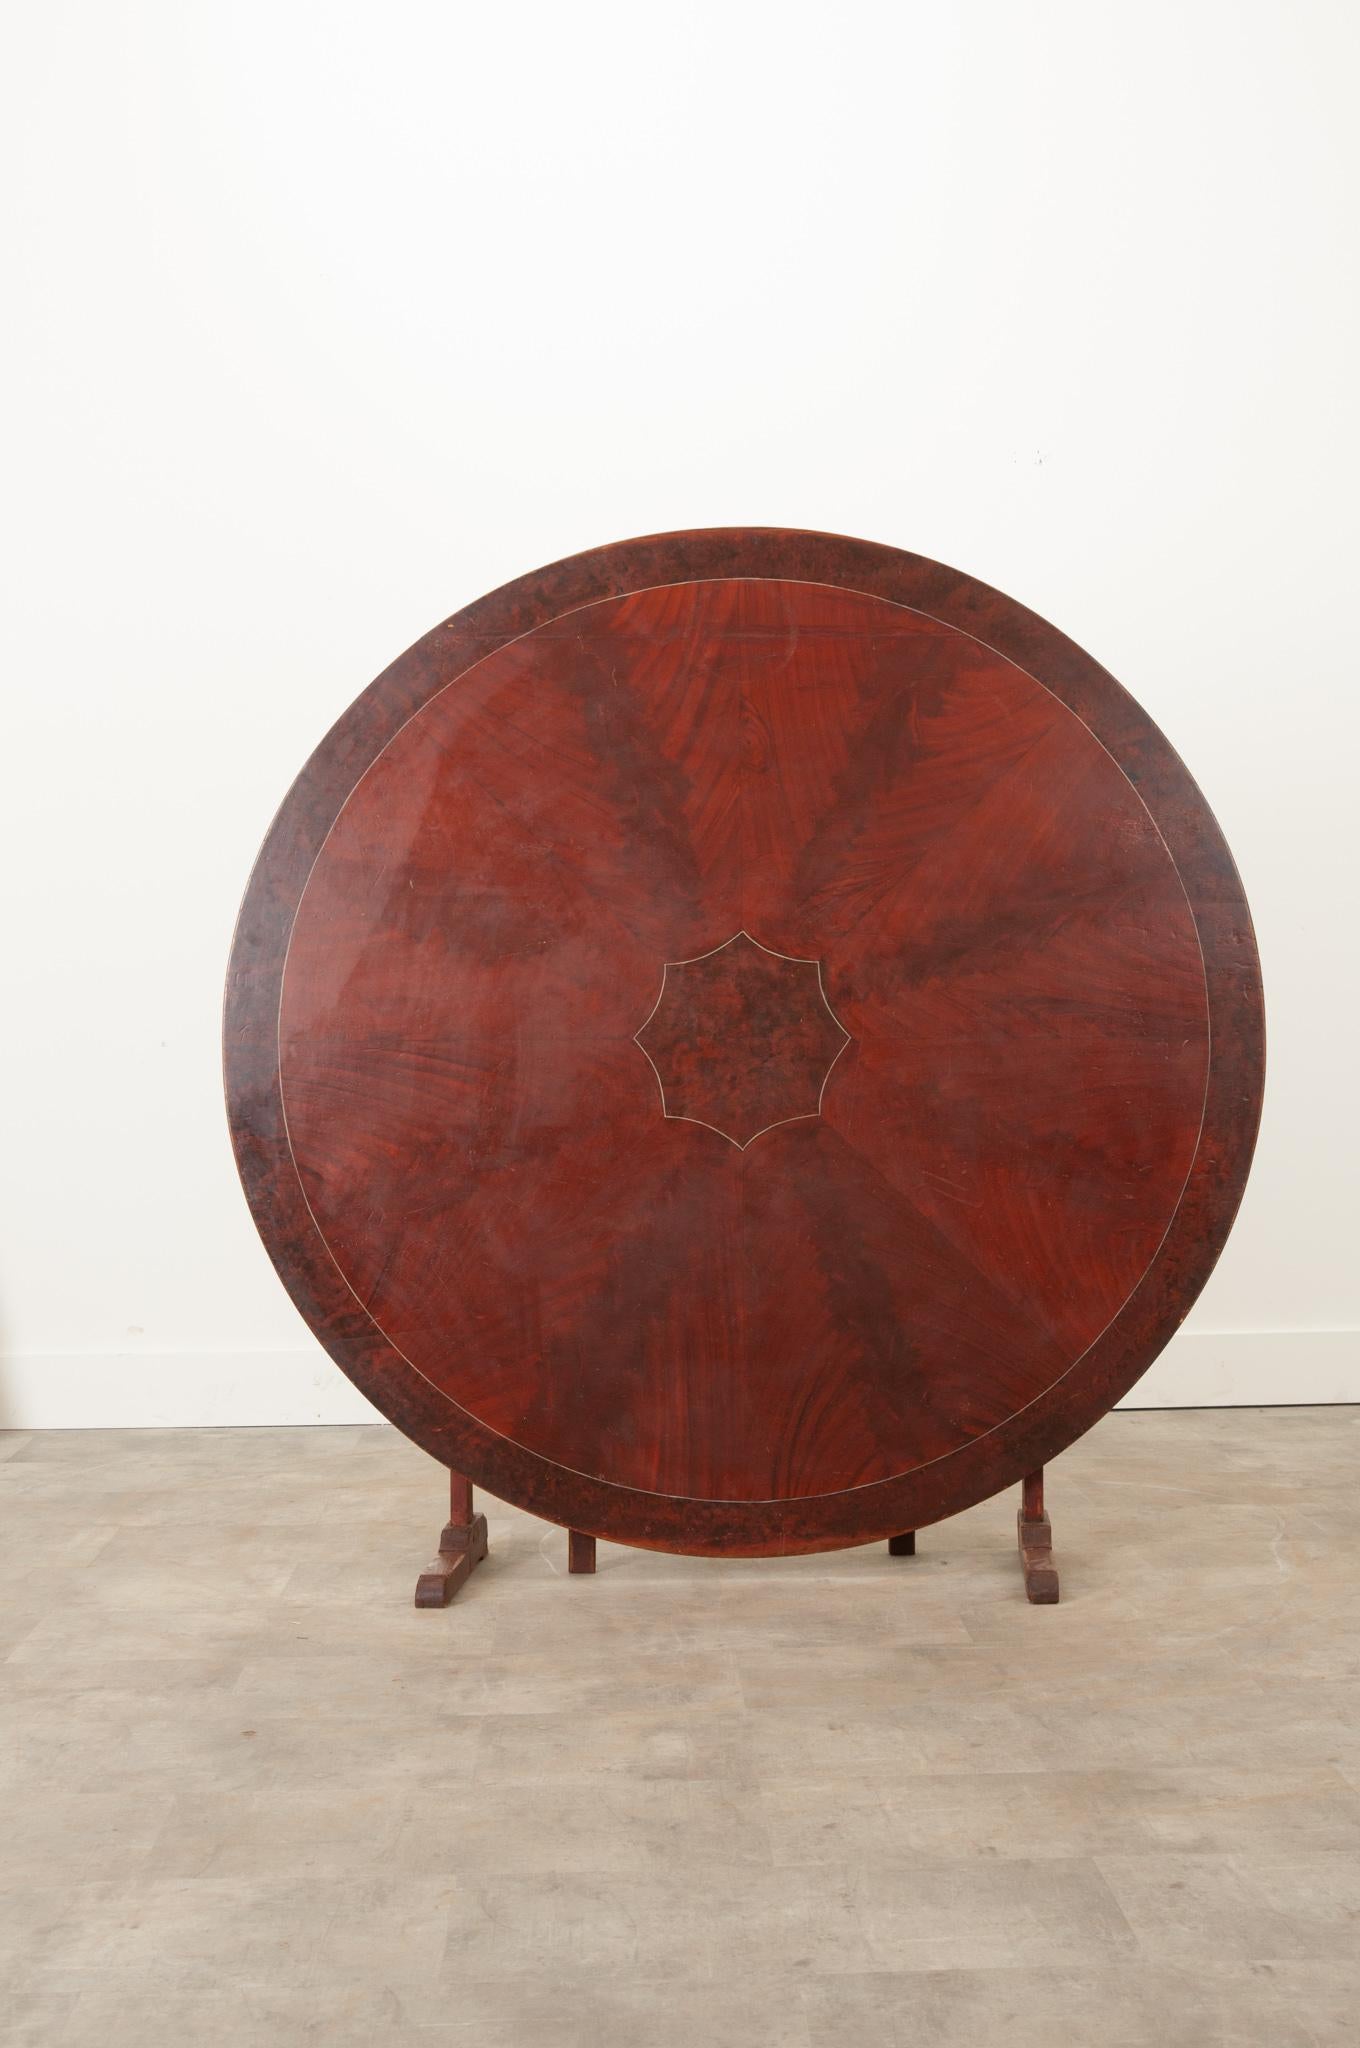 An impressive 19th century Swedish gateleg tilt top table. Eight pointed starburst in the center and an encompassing border, done in light gray paint, accentuates the slight differences in the wood grain. Supported by a gateleg, it’s incredibly easy